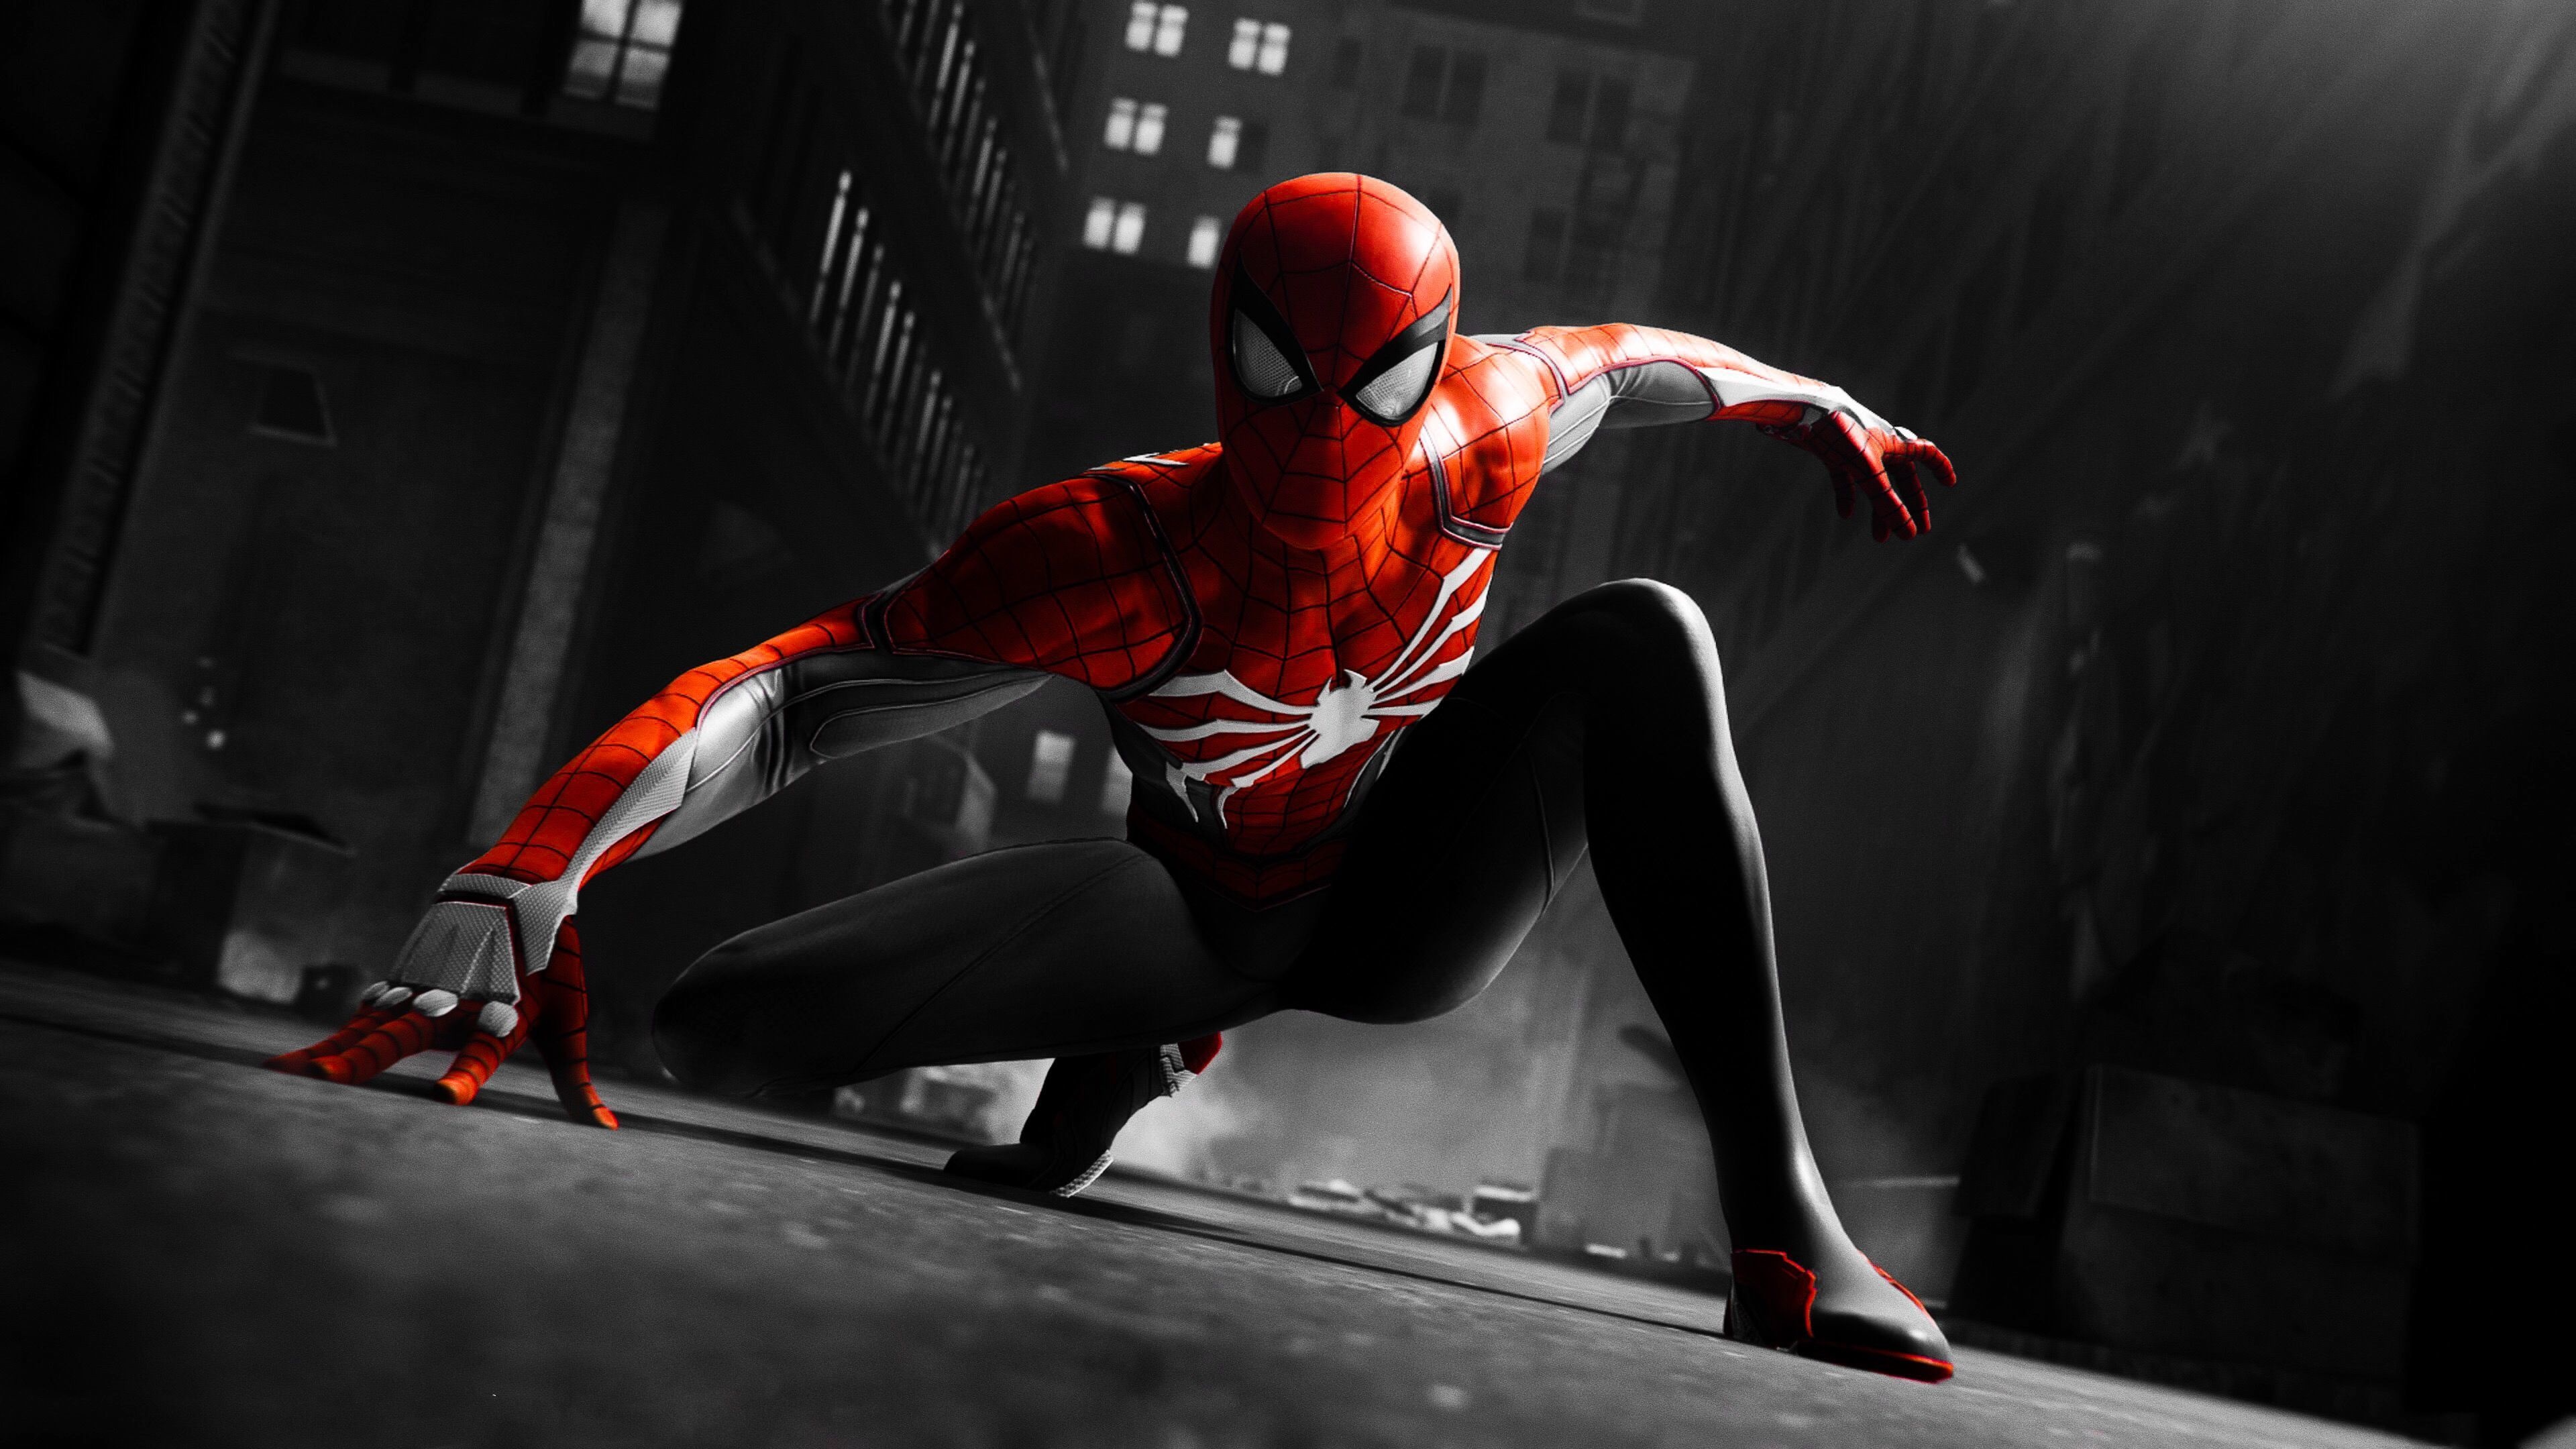 Download 3840x2160 wallpaper  black  and red suit spider 